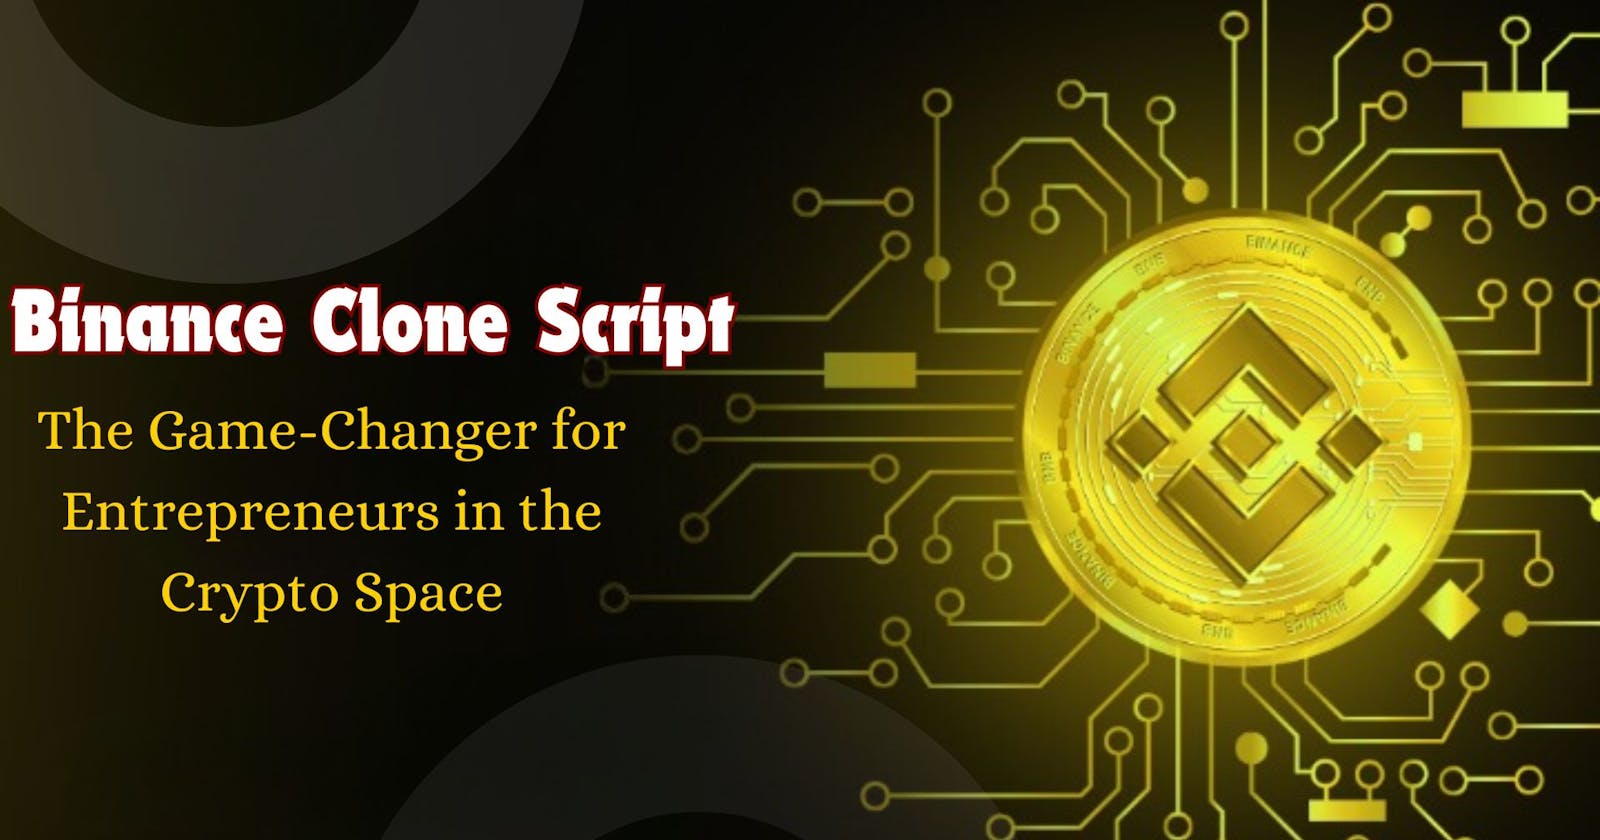 Binance Clone Script: The Game-Changer for Entrepreneurs in the Crypto Space